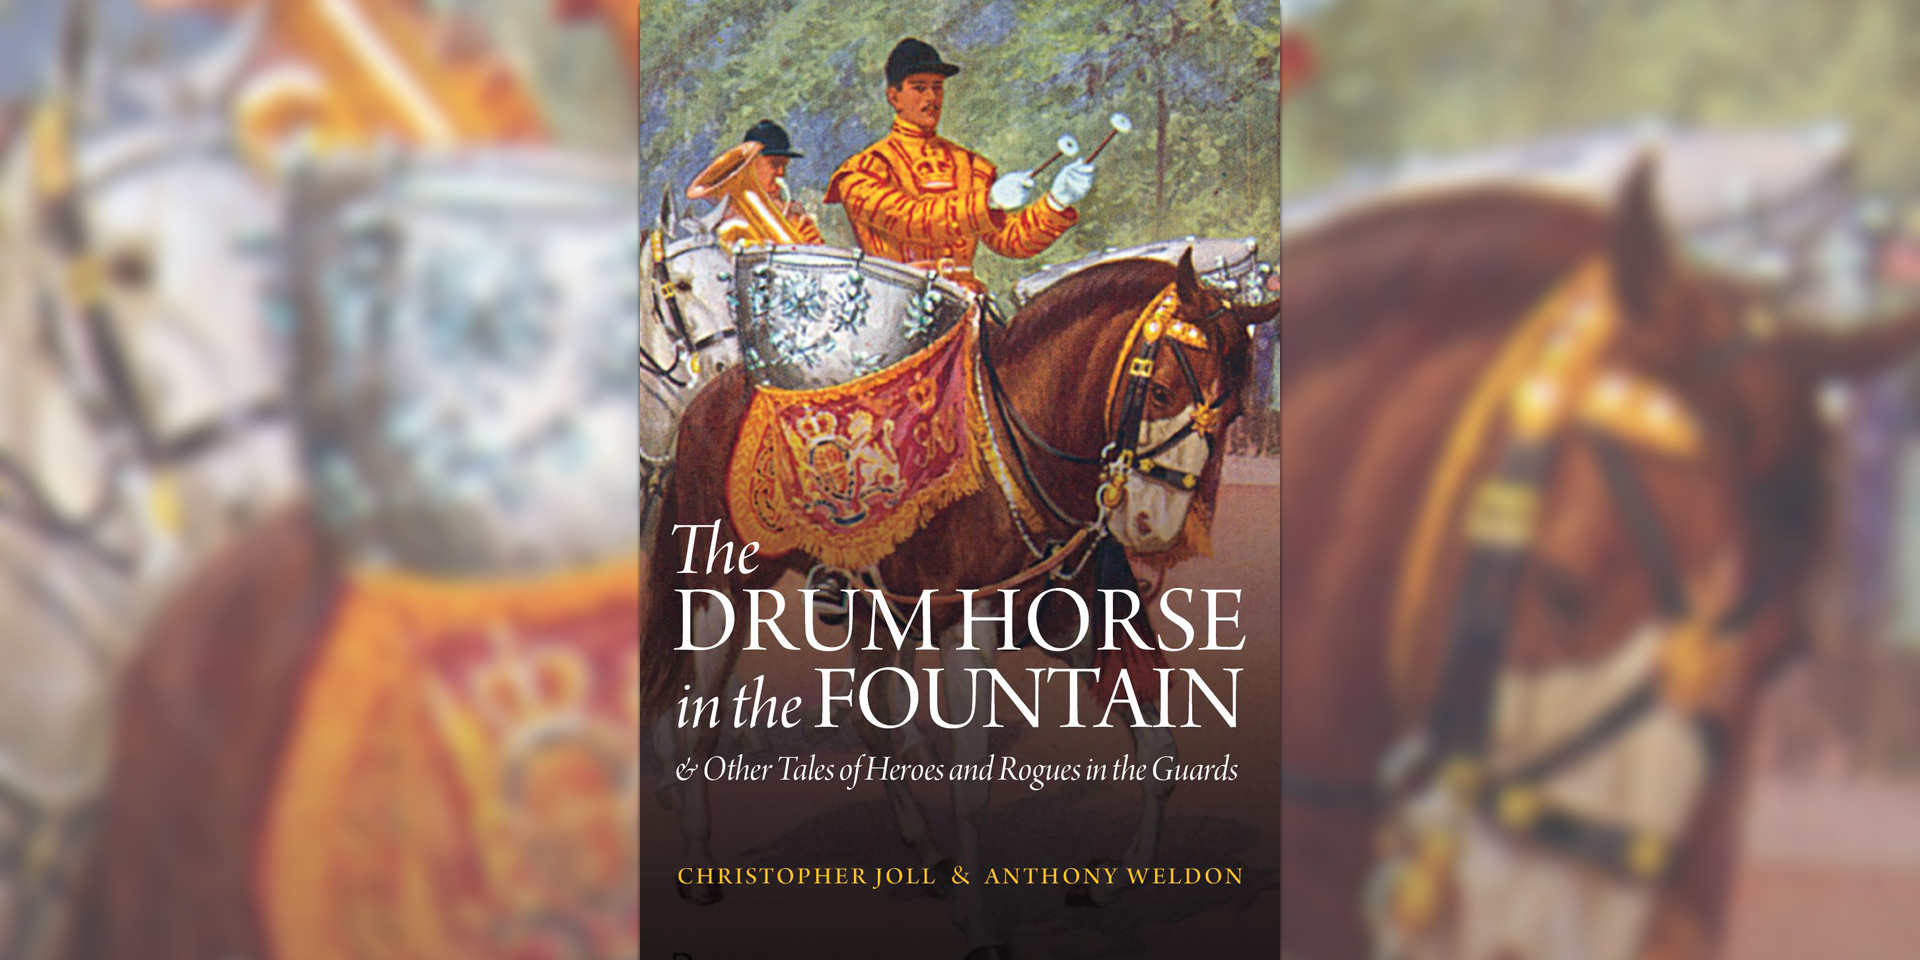 The Drum Horse in the Fountain book cover